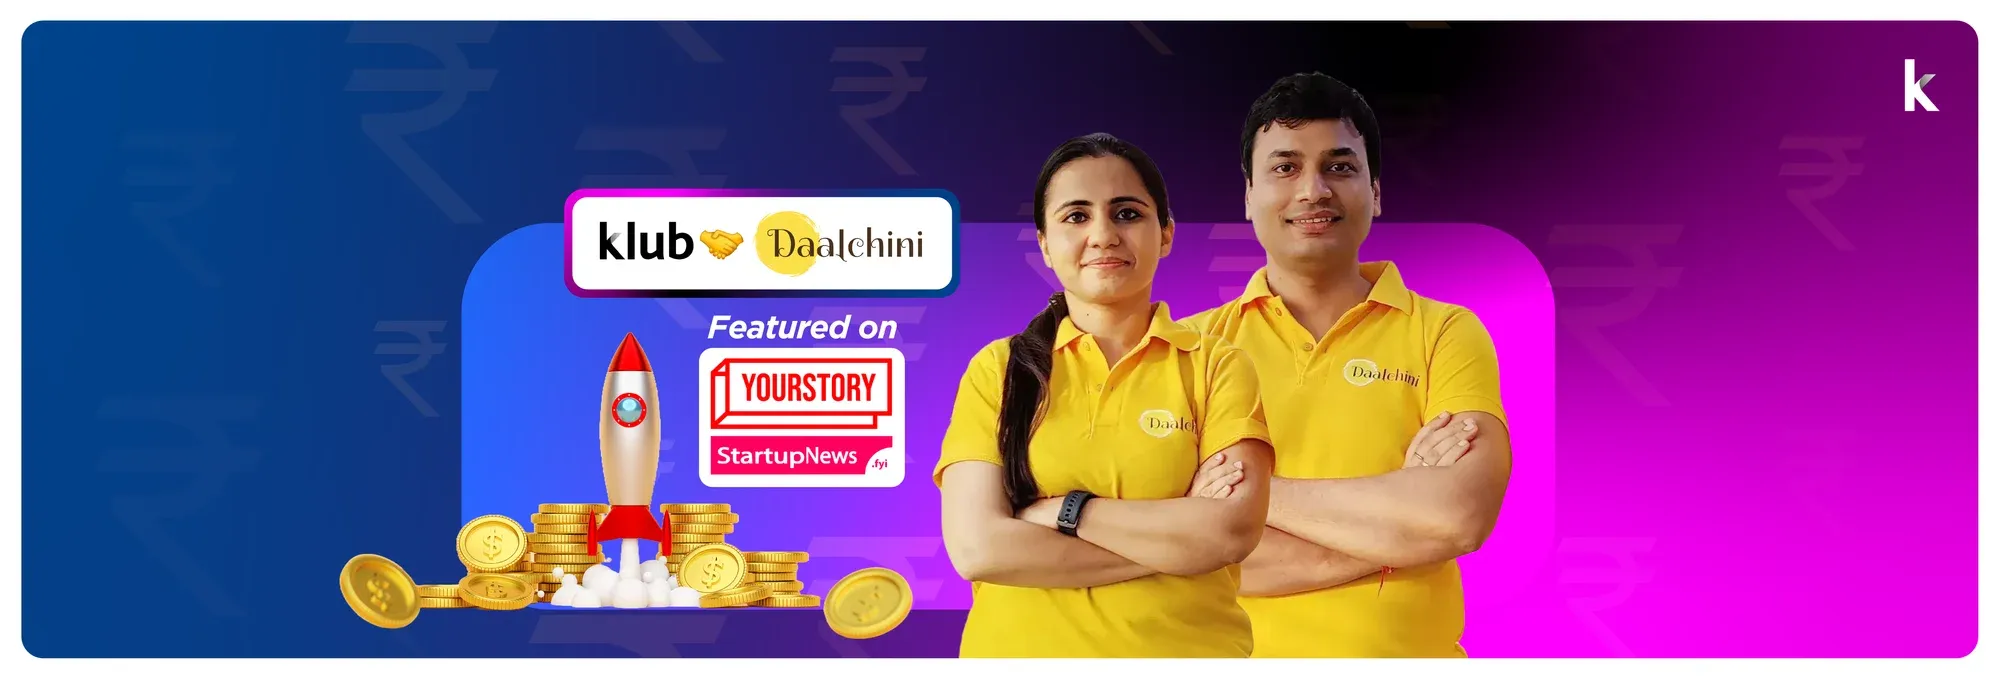 Klub backed Daalchini aims to cross ₹100 crores ARR in the next 12 months